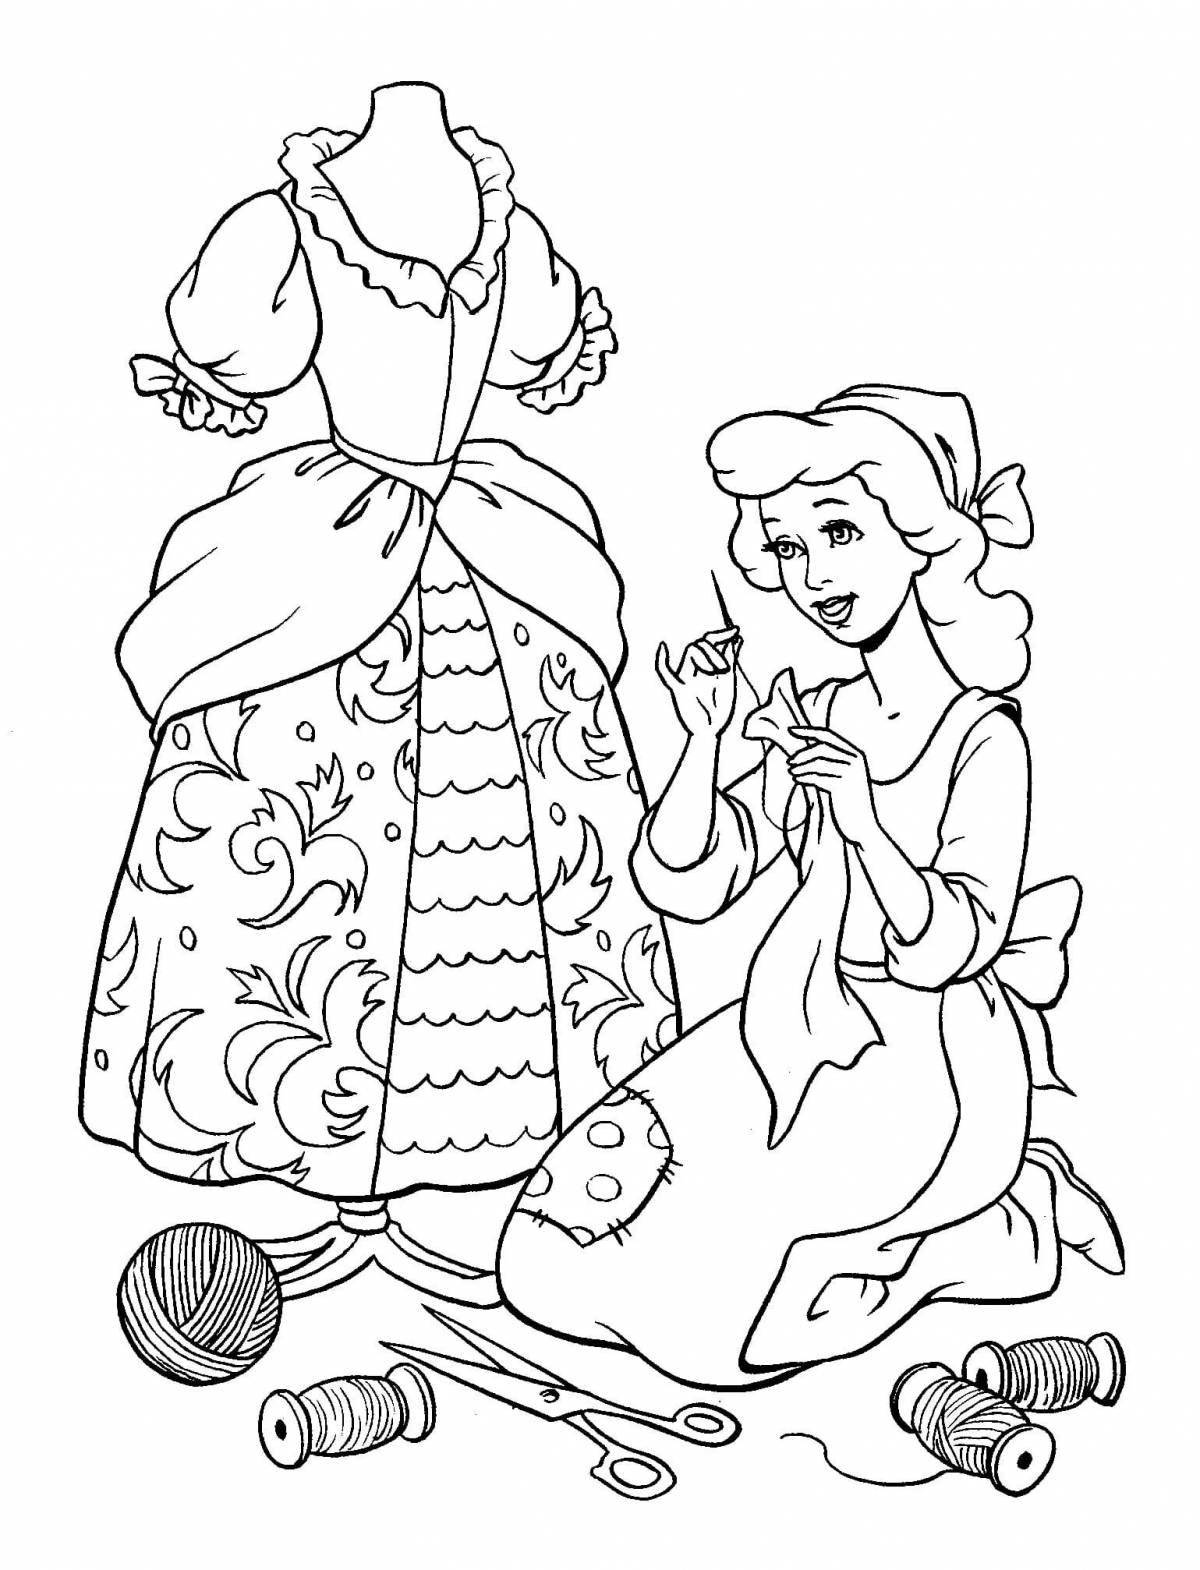 Friendly fairy tale coloring book senior group